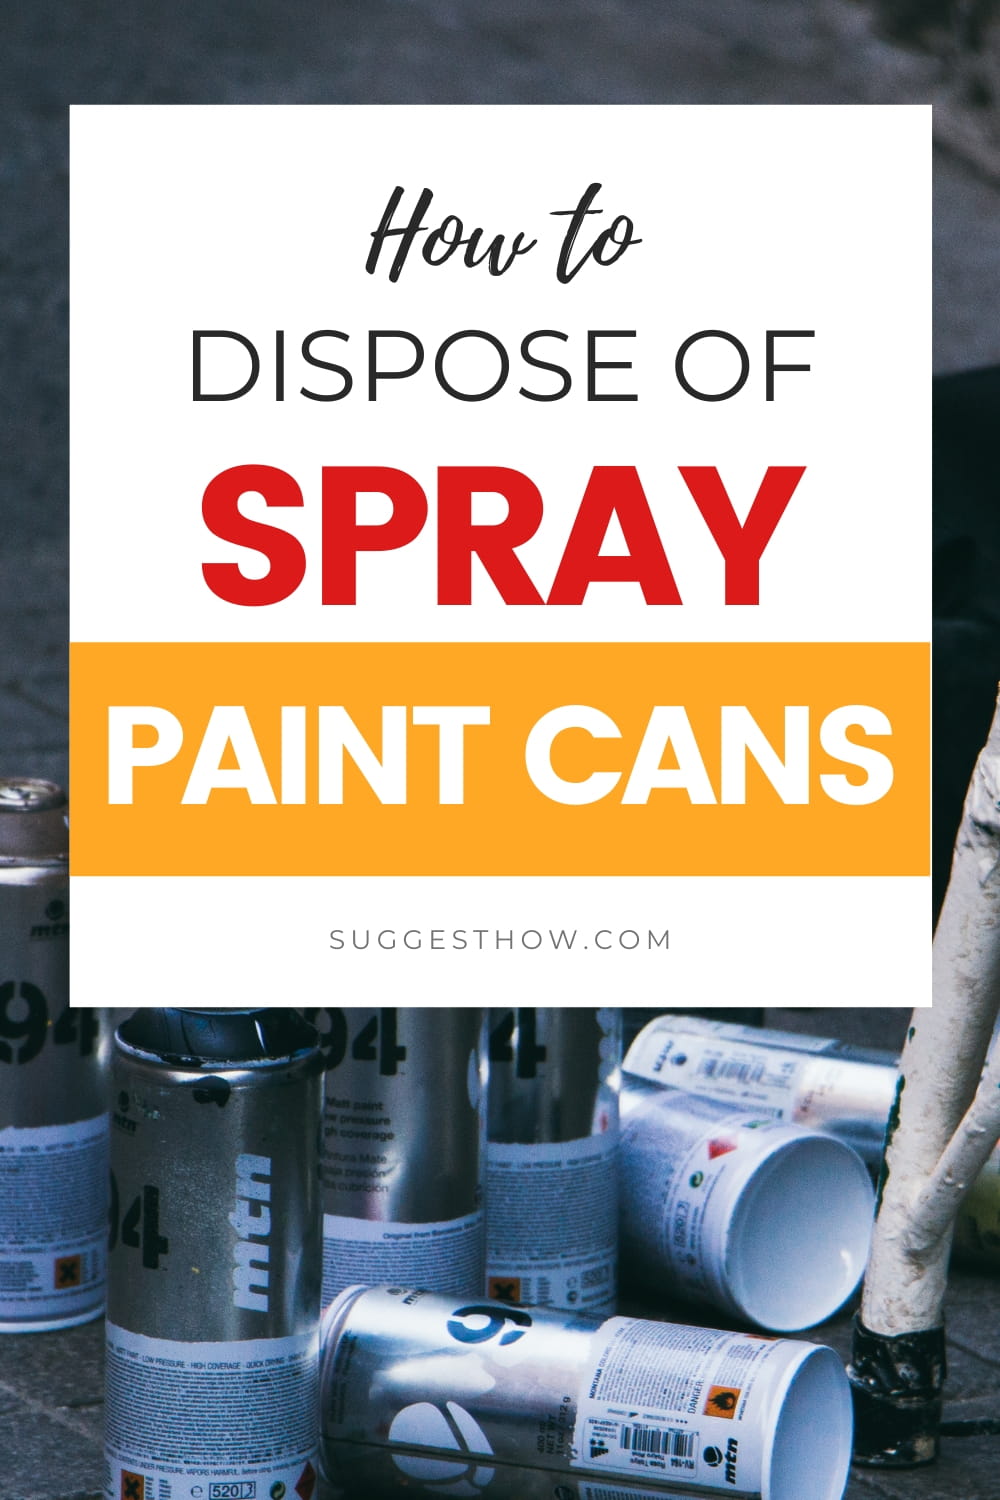 How to Dispose of Spray Paint Cans? Precautions & Recycling